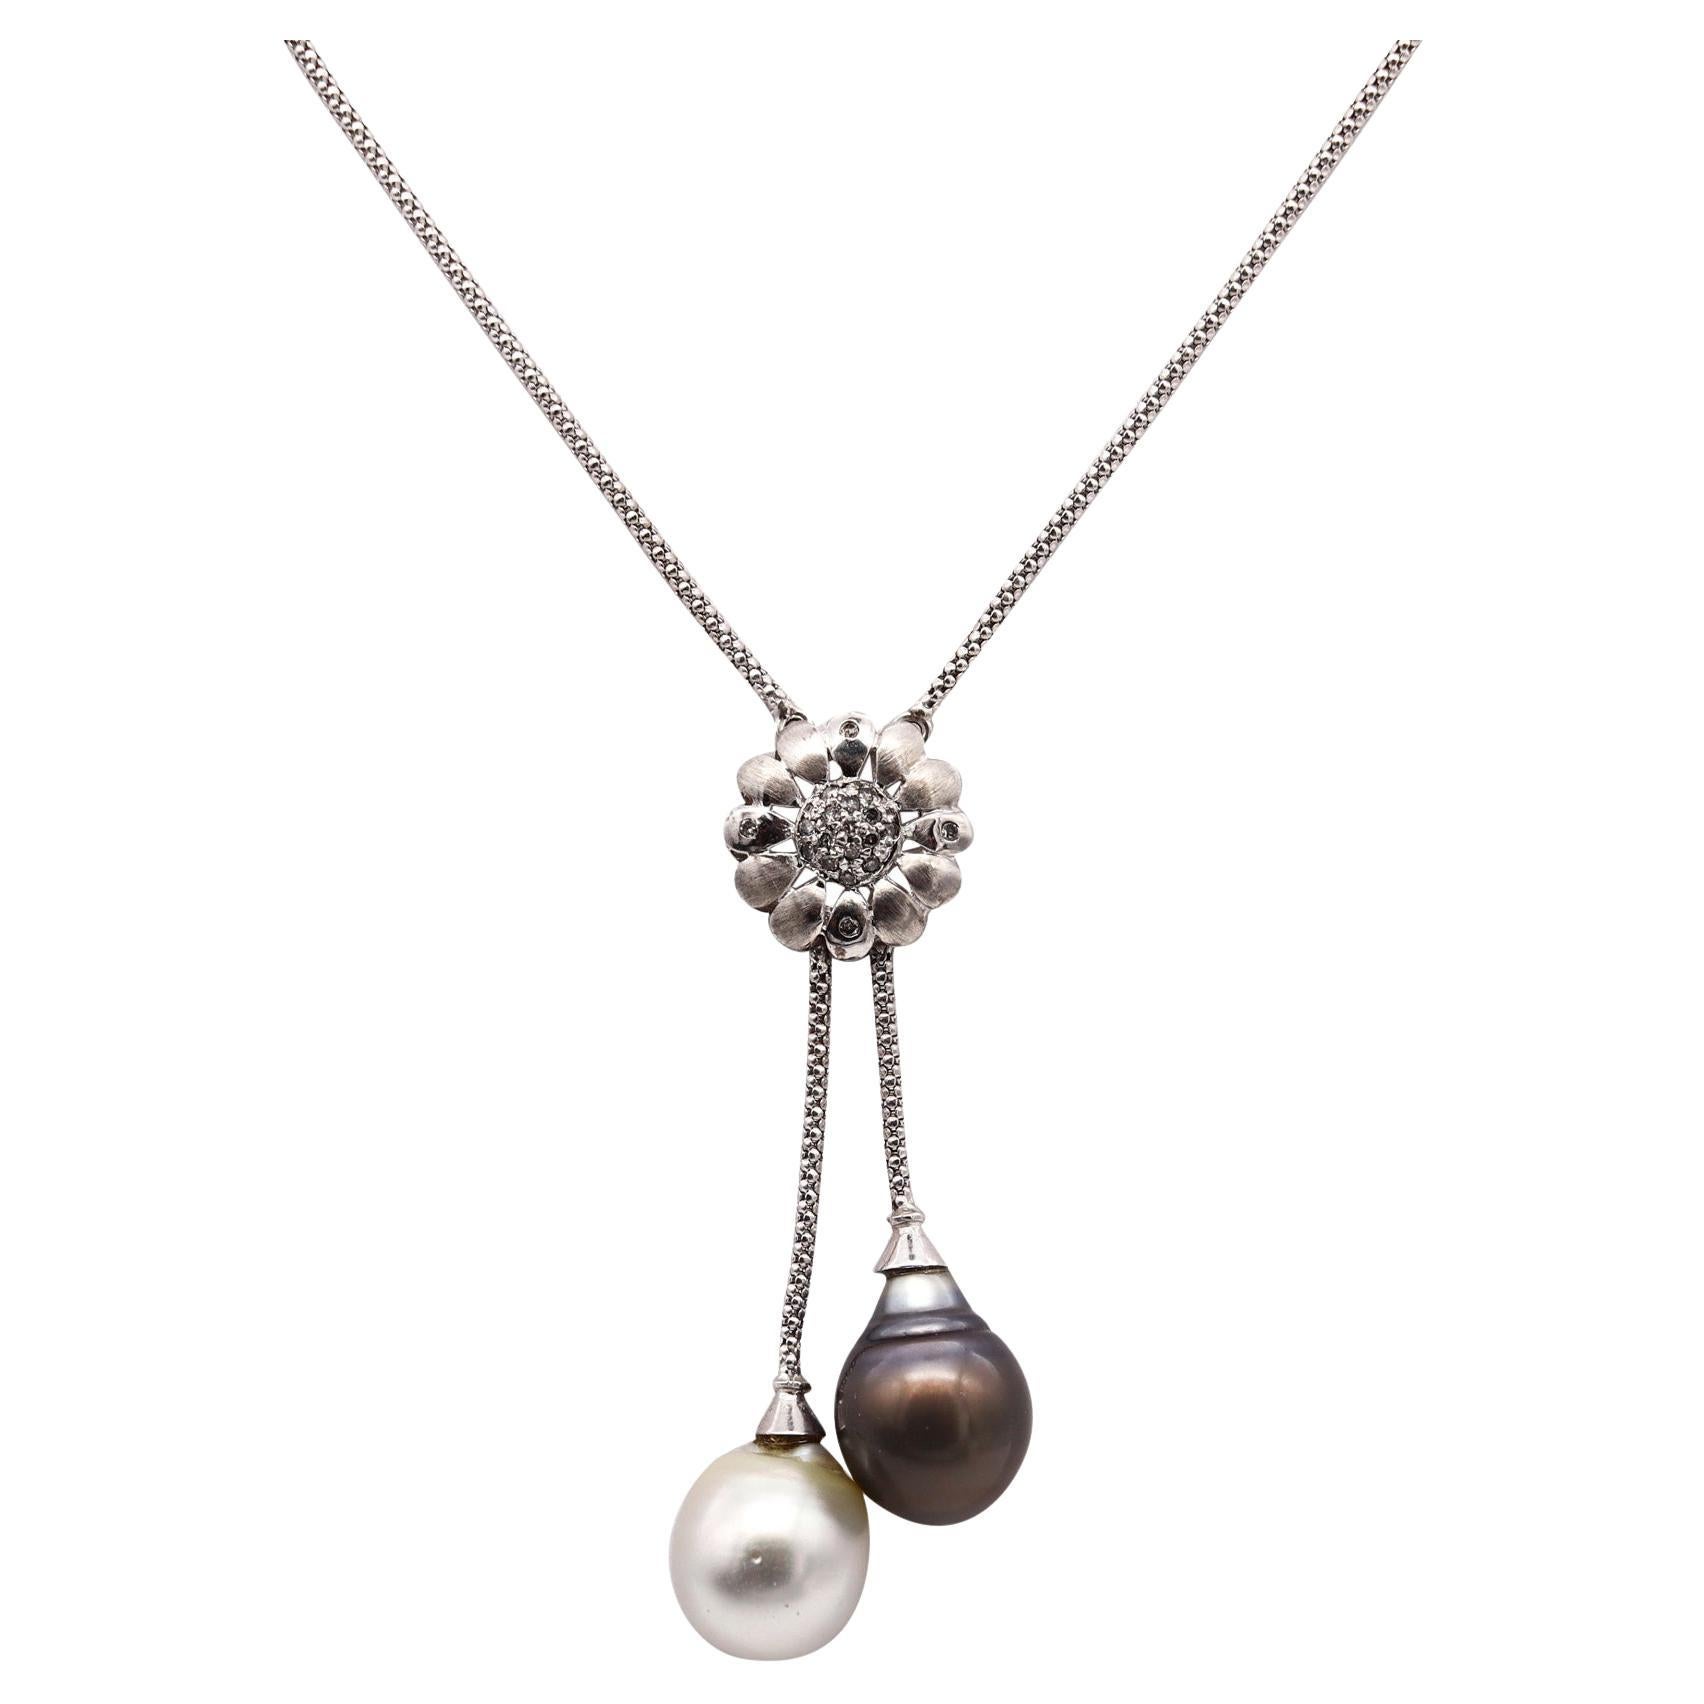 UnoAerre Lariat Necklace In 18Kt Gold With Diamonds Black White South Sea Pearls